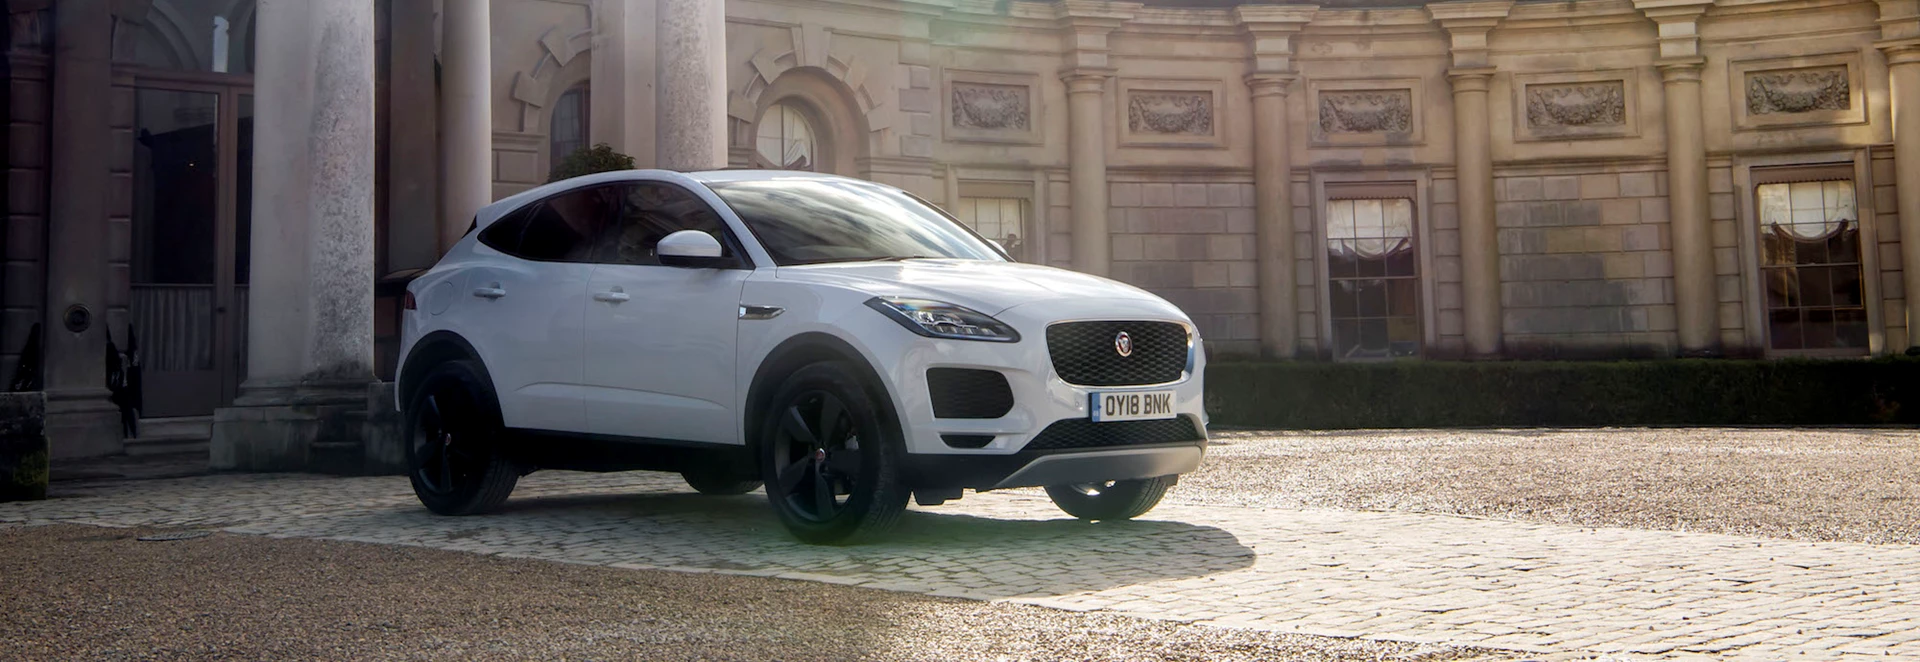 Buyer’s Guide to the Jaguar E-Pace